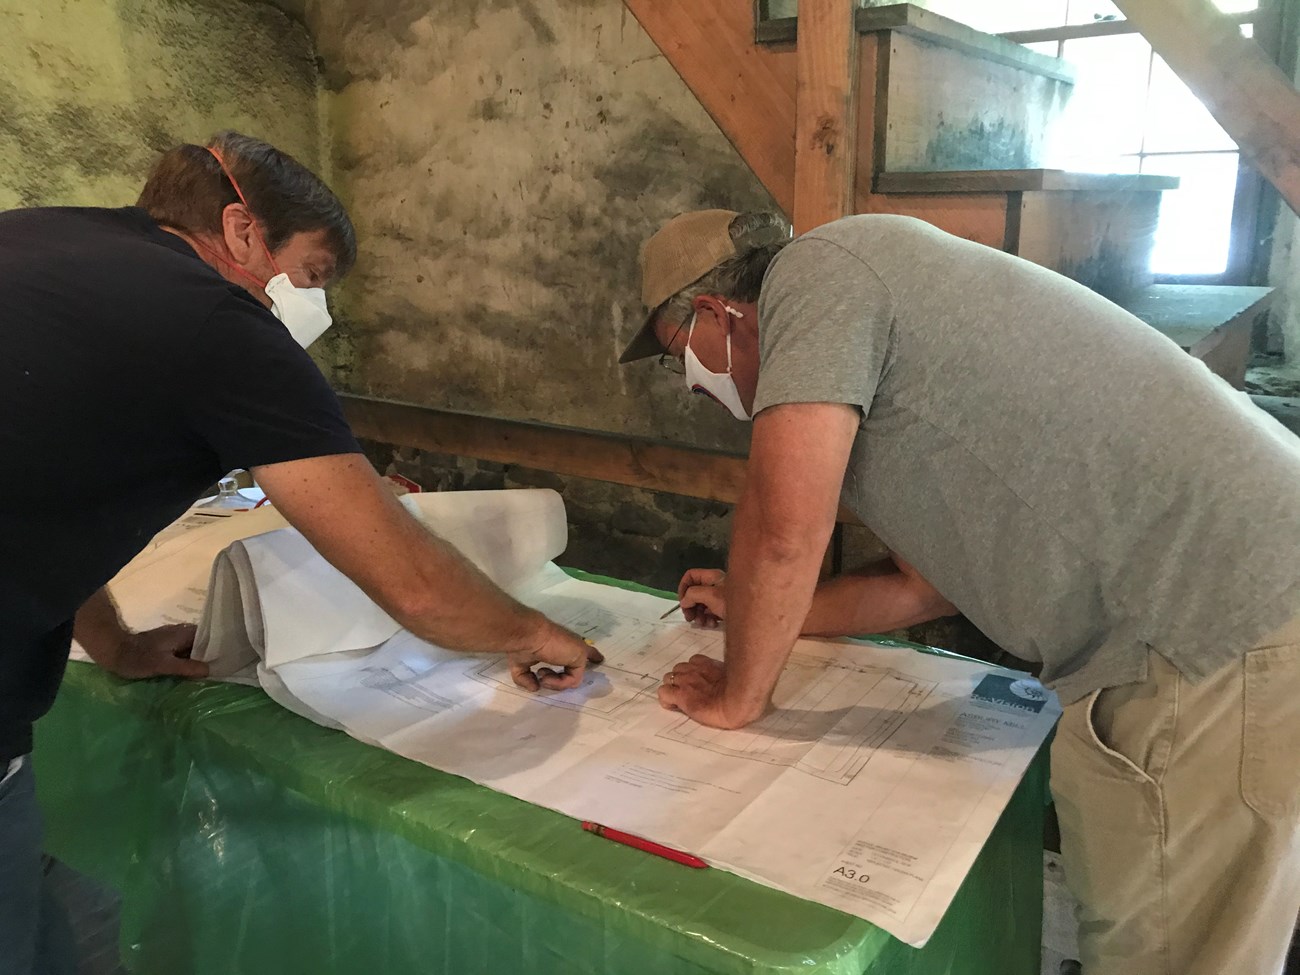 Ray Mulvey, Electrician (Mulvey Electric), and Paul Schroeck, Construction manager (Windward Environmental), look over the plan to install code-required safety lighting as Asbury Mill is restored.  Photo courtesy of Alan Hunt and the Musconetcong Watershe